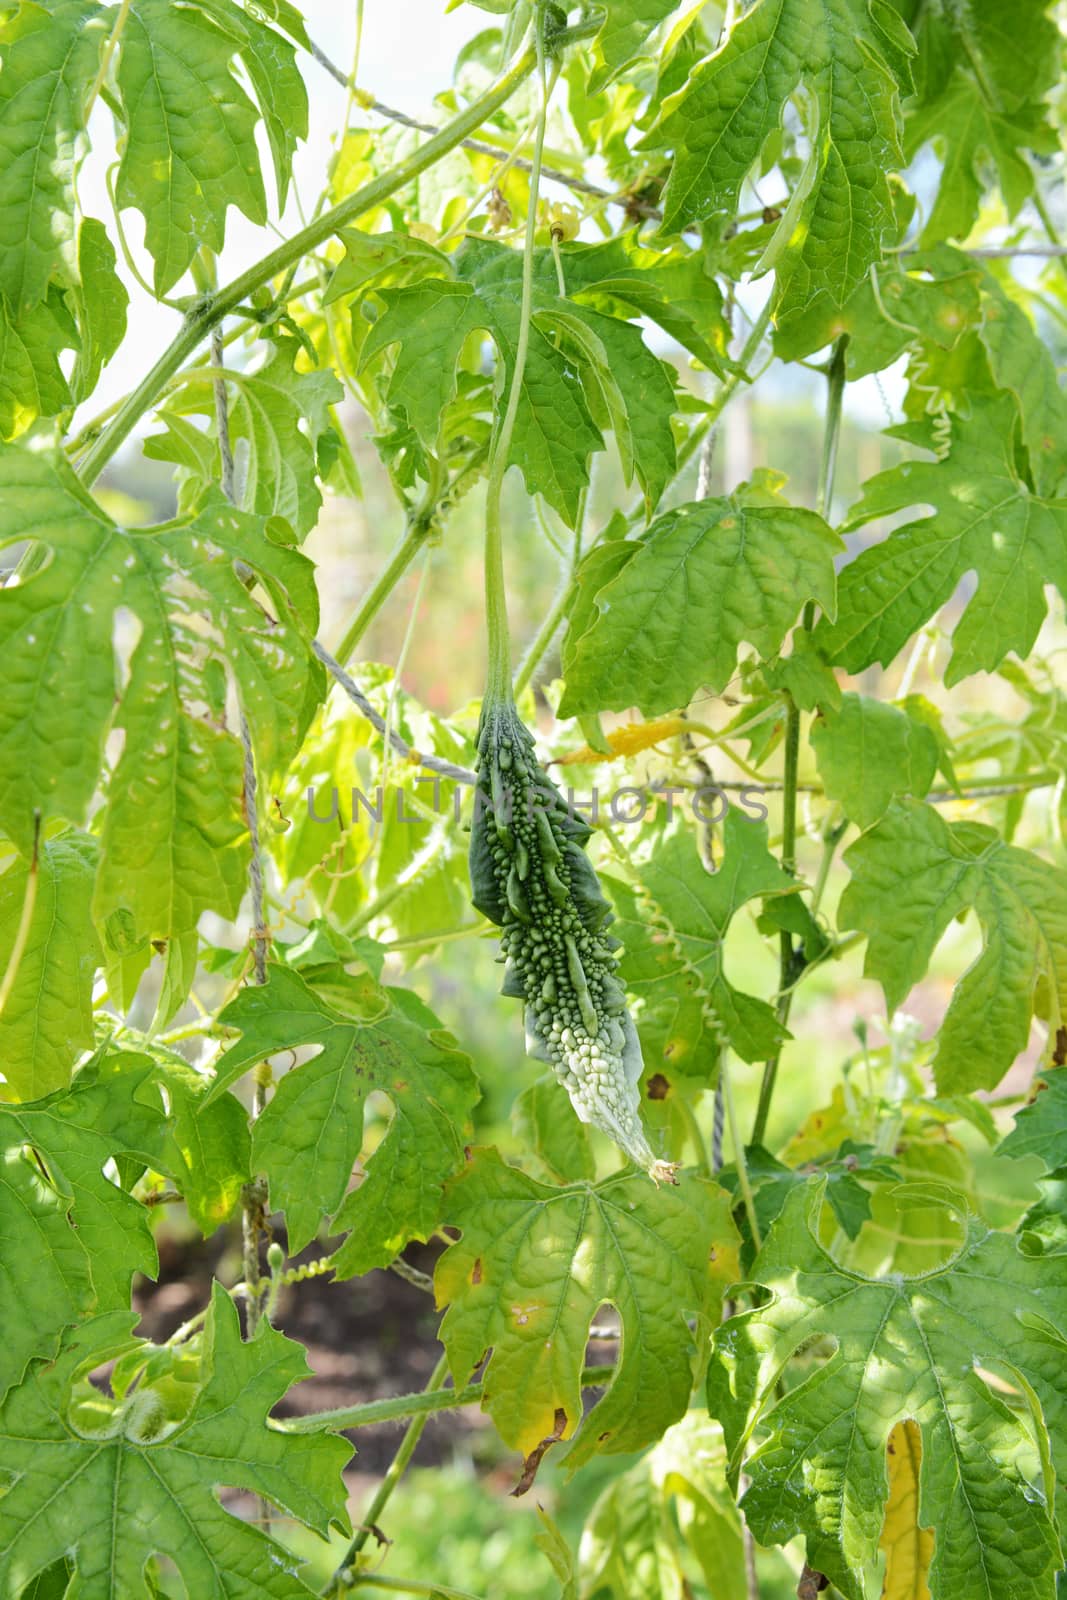 Spined bitter gourd growing on a leafy vine by sarahdoow